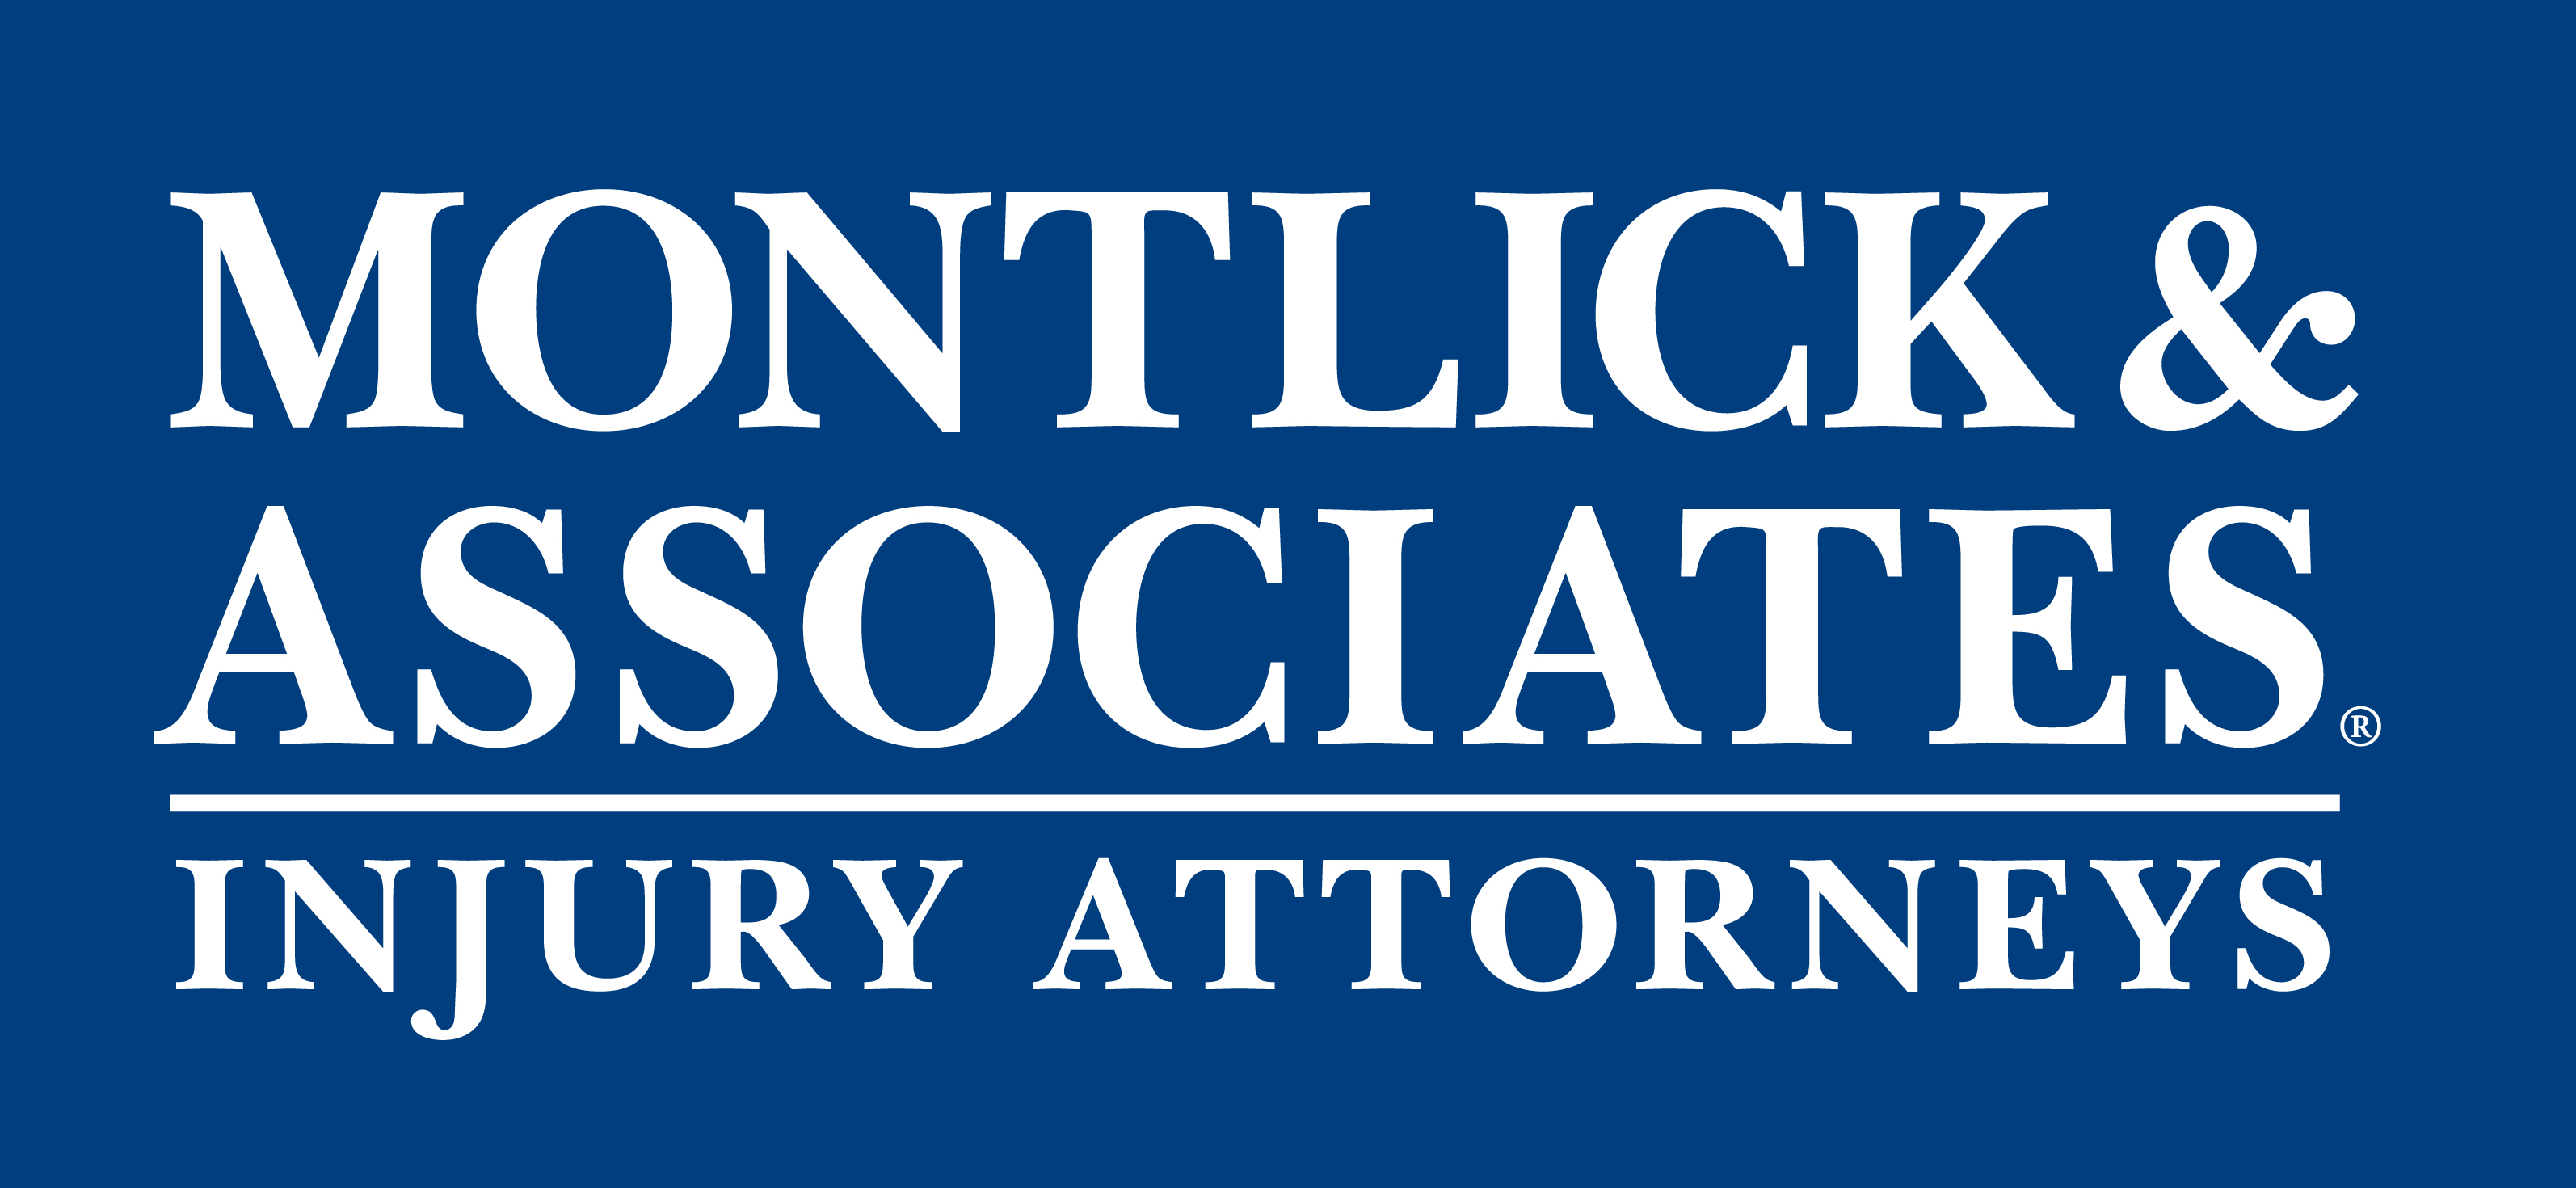 Georgia Personal Injury Attorneys Montlick & Associates has been helping families get the compensation they deserve since 1984.